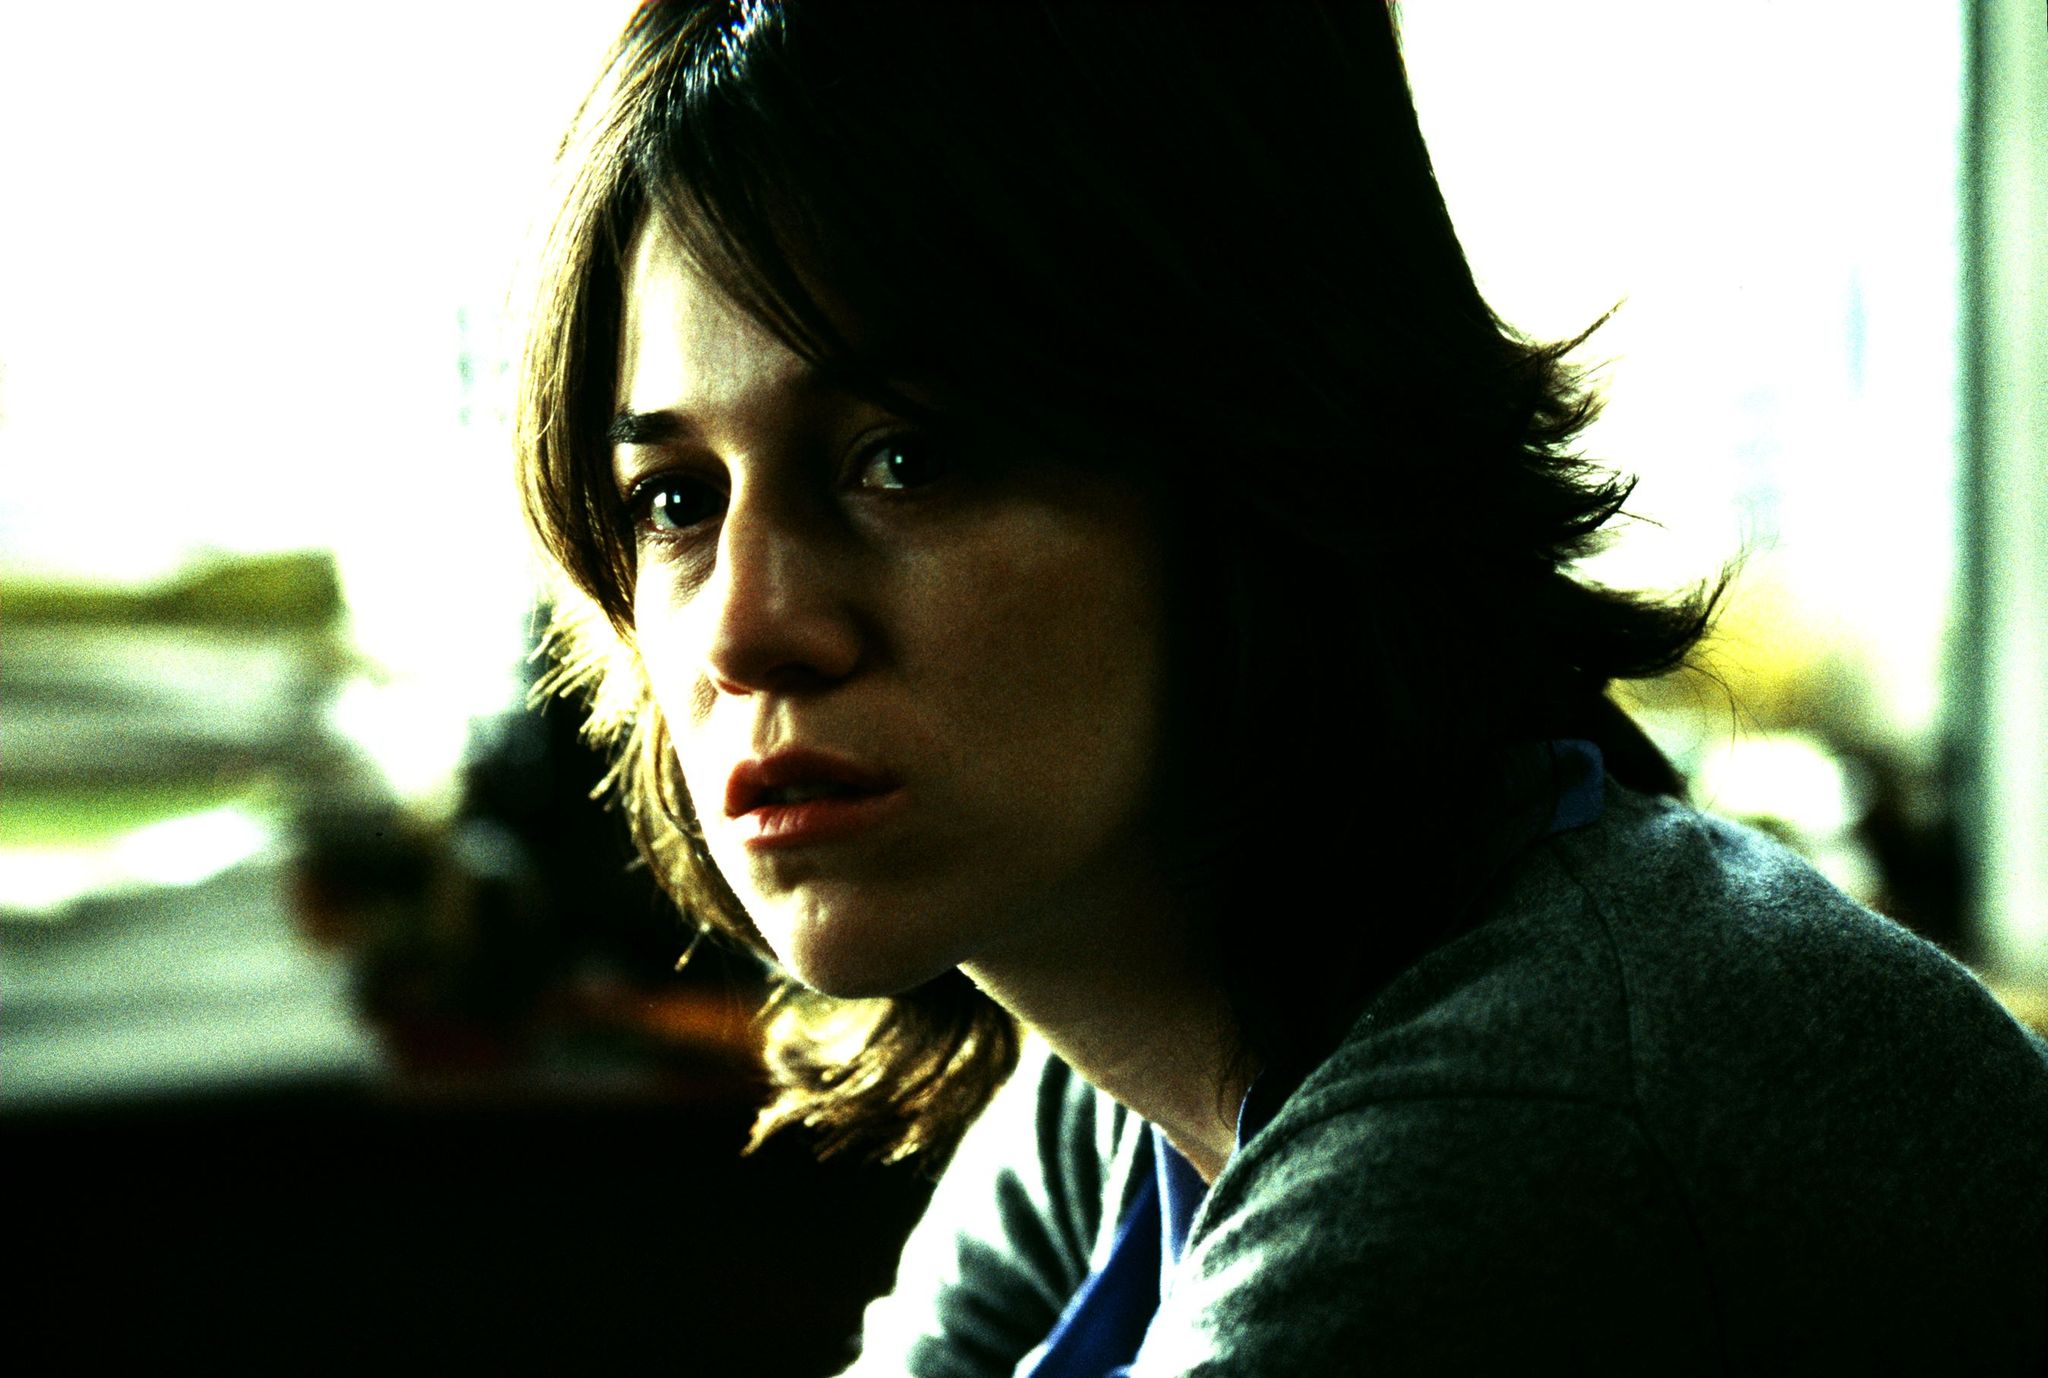 Still of Charlotte Gainsbourg in 21 gramas (2003)